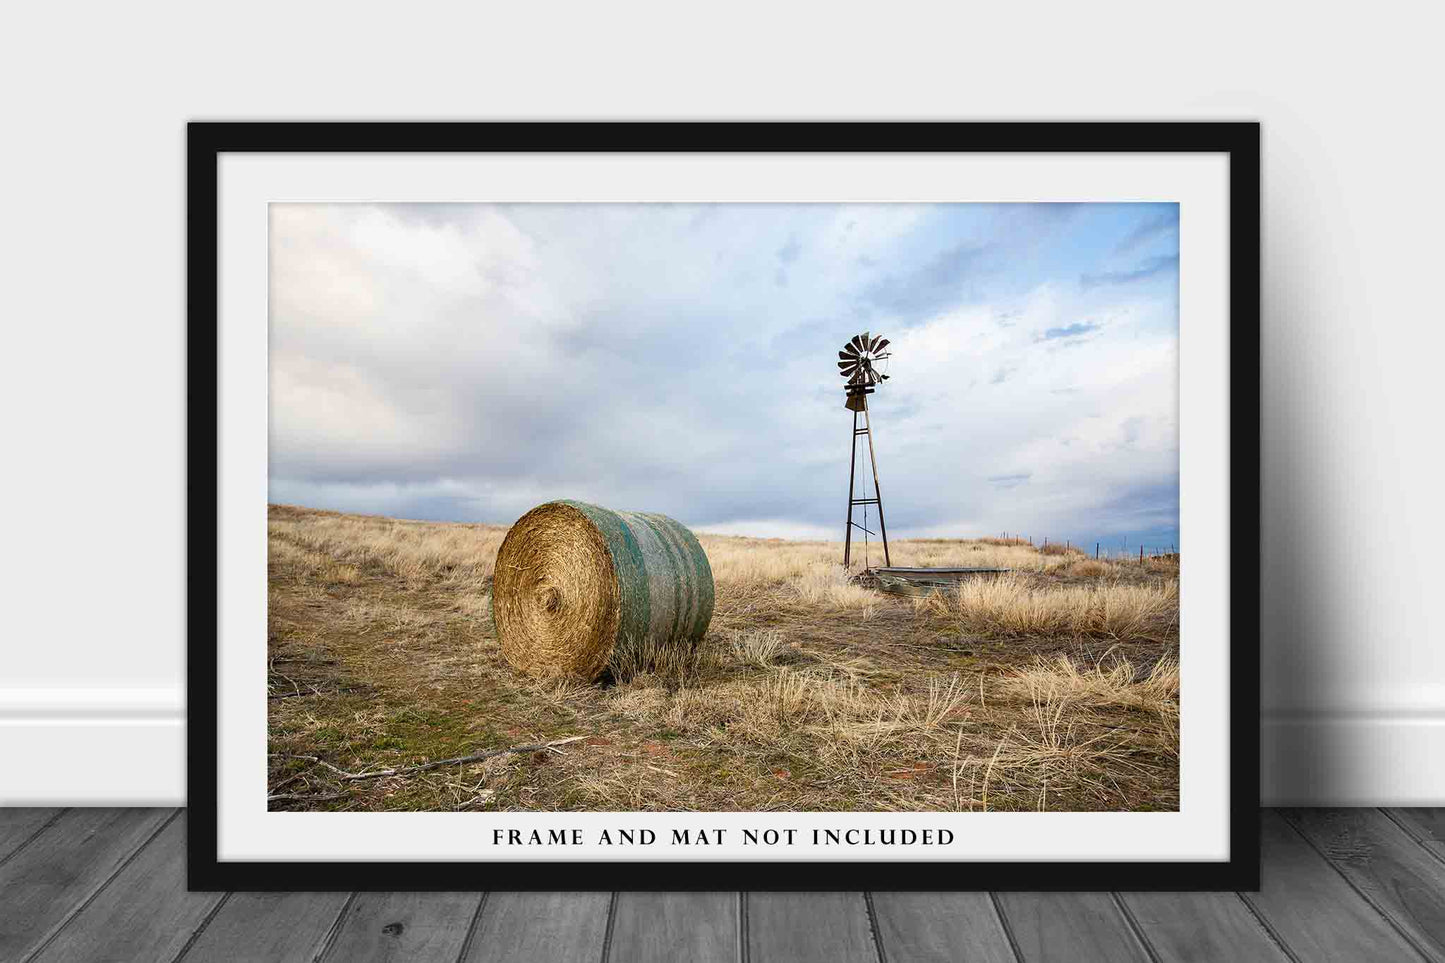 Country Photography Print - Picture of Windmill and Round Hay Bale on Oklahoma Prairie - Rustic Farmhouse Wall Art Photo Farm Artwork Decor